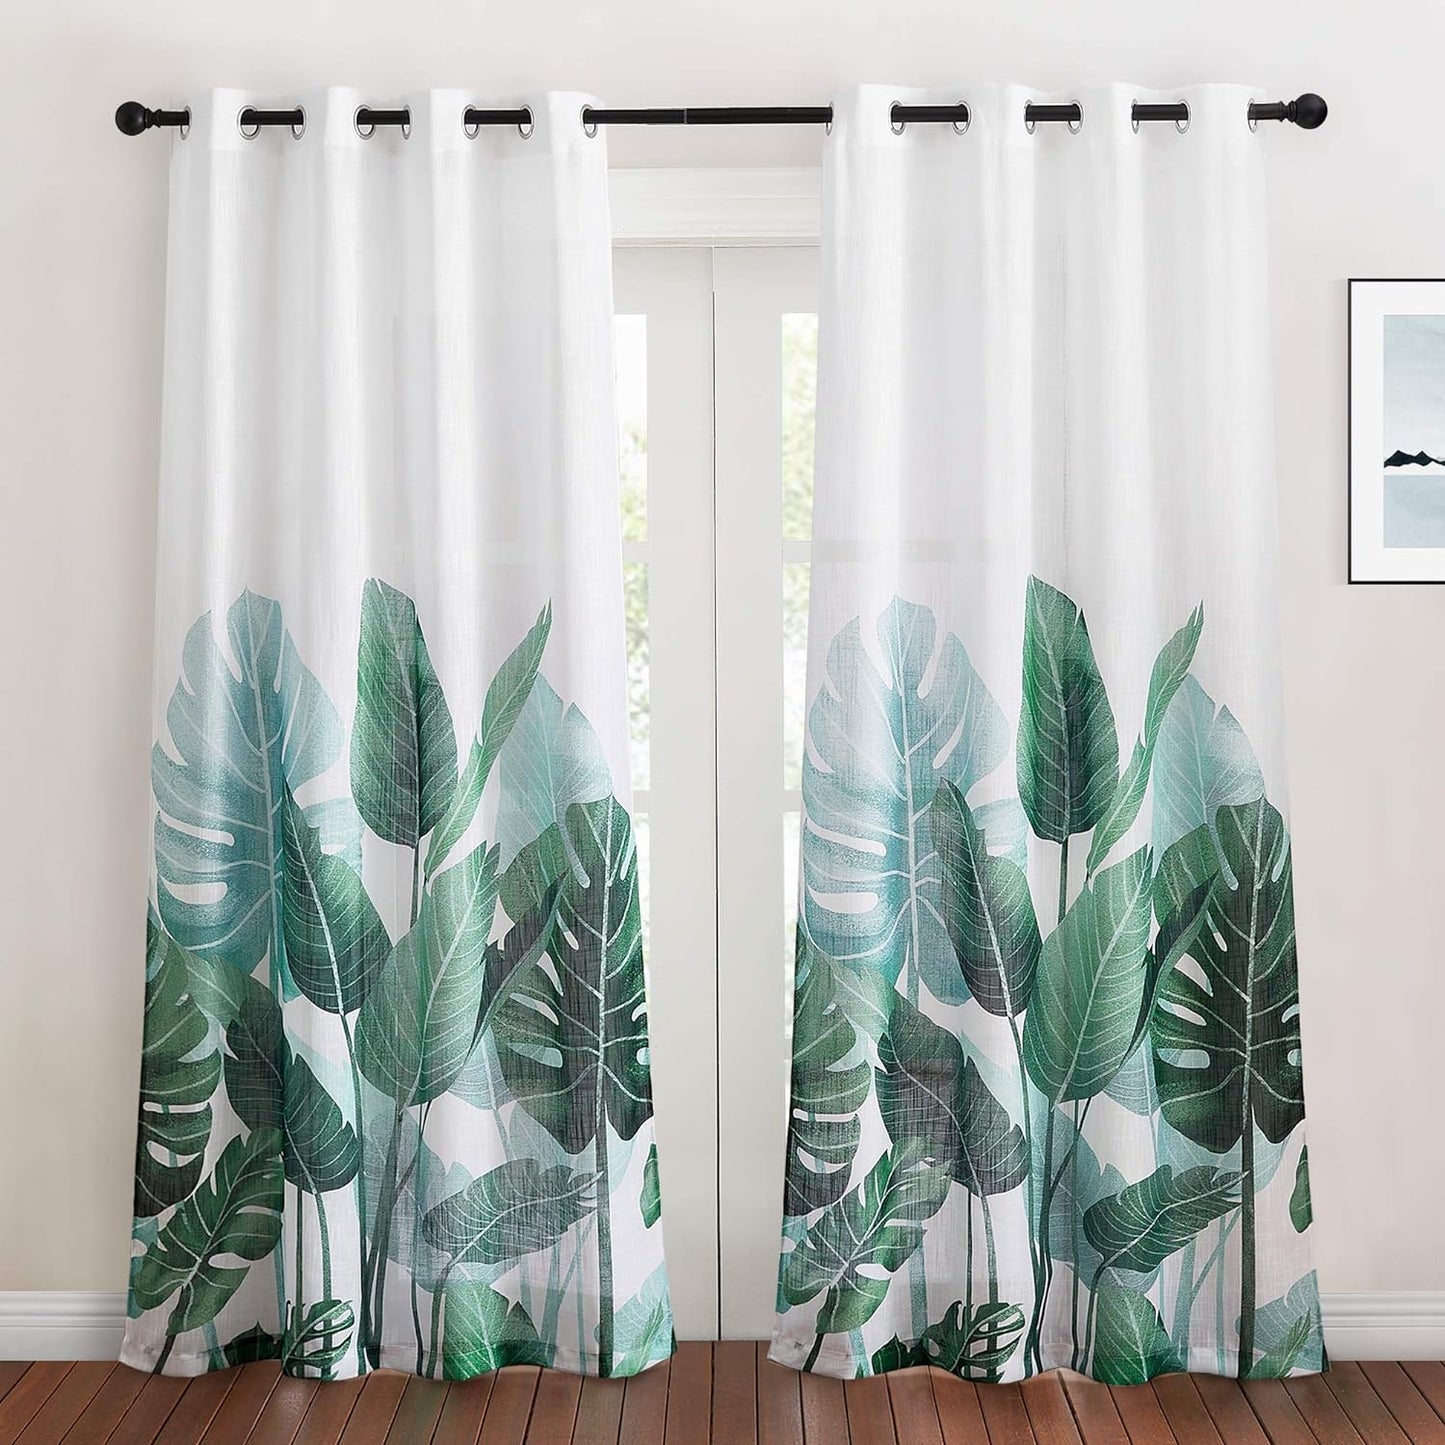 KGORGE Blackout Curtains for Bedroom, Farmhouse Tripical Leaves Pattern Curtains & Drapes Insulating Privacy Window Treatment for Dining Living Room Office Studio, W52 X L63 Inch, 2 Panels  KGORGE Linen W50 X L84 | Pair 